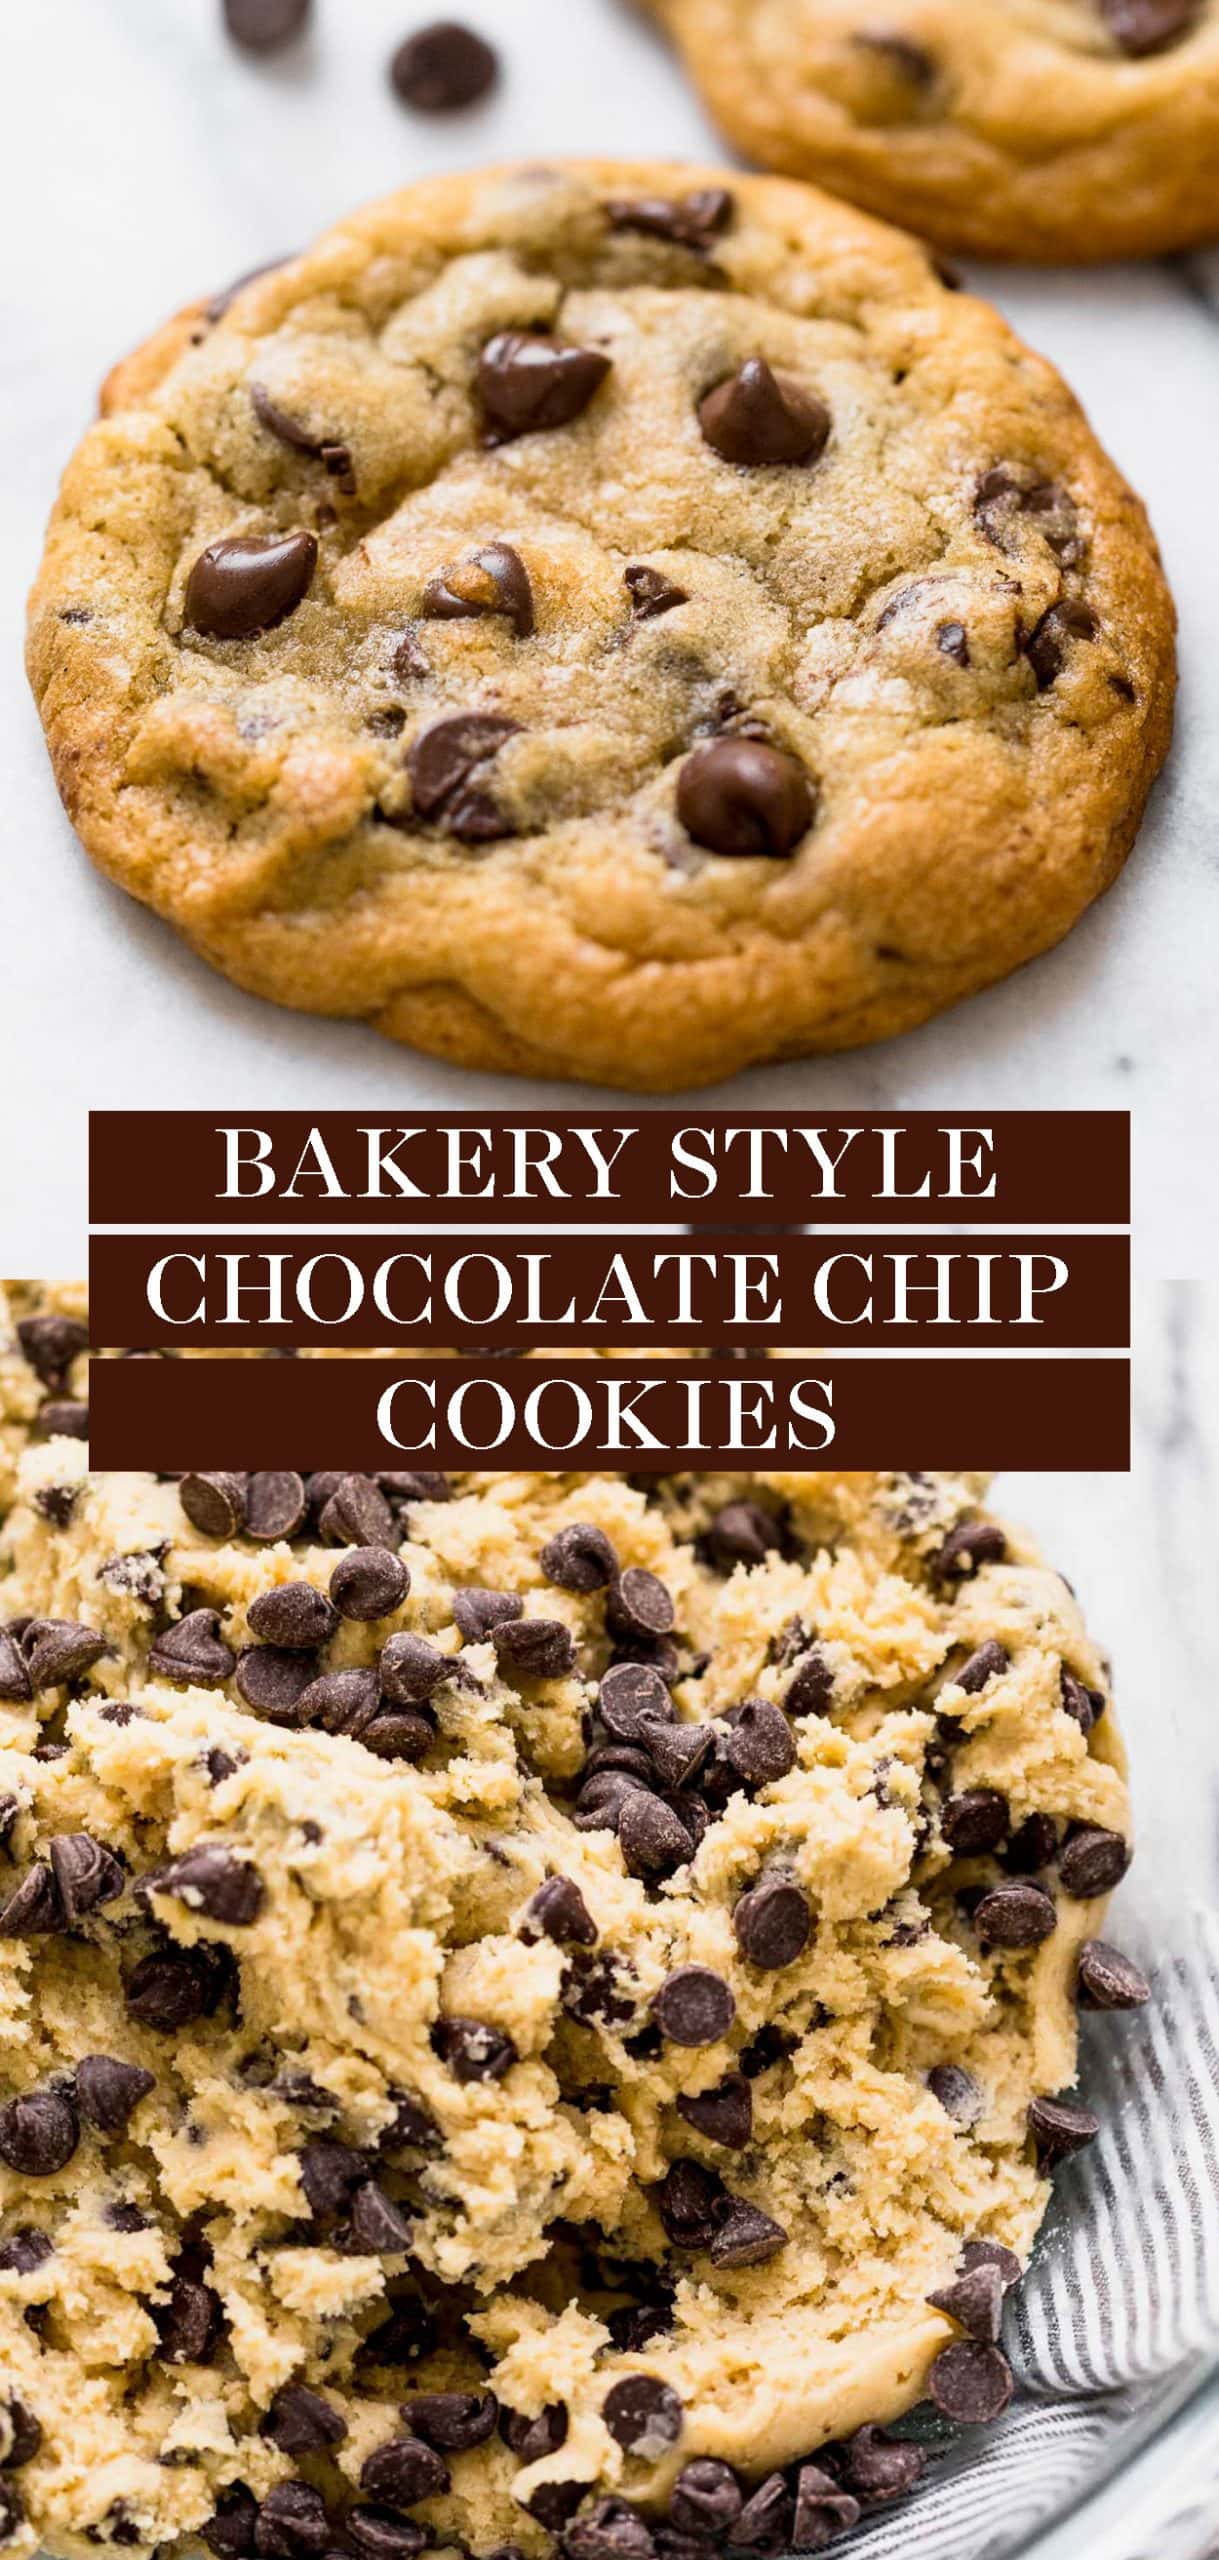 Best Bakery Style Chocolate Chip Cookies Recipe | Handle the Heat